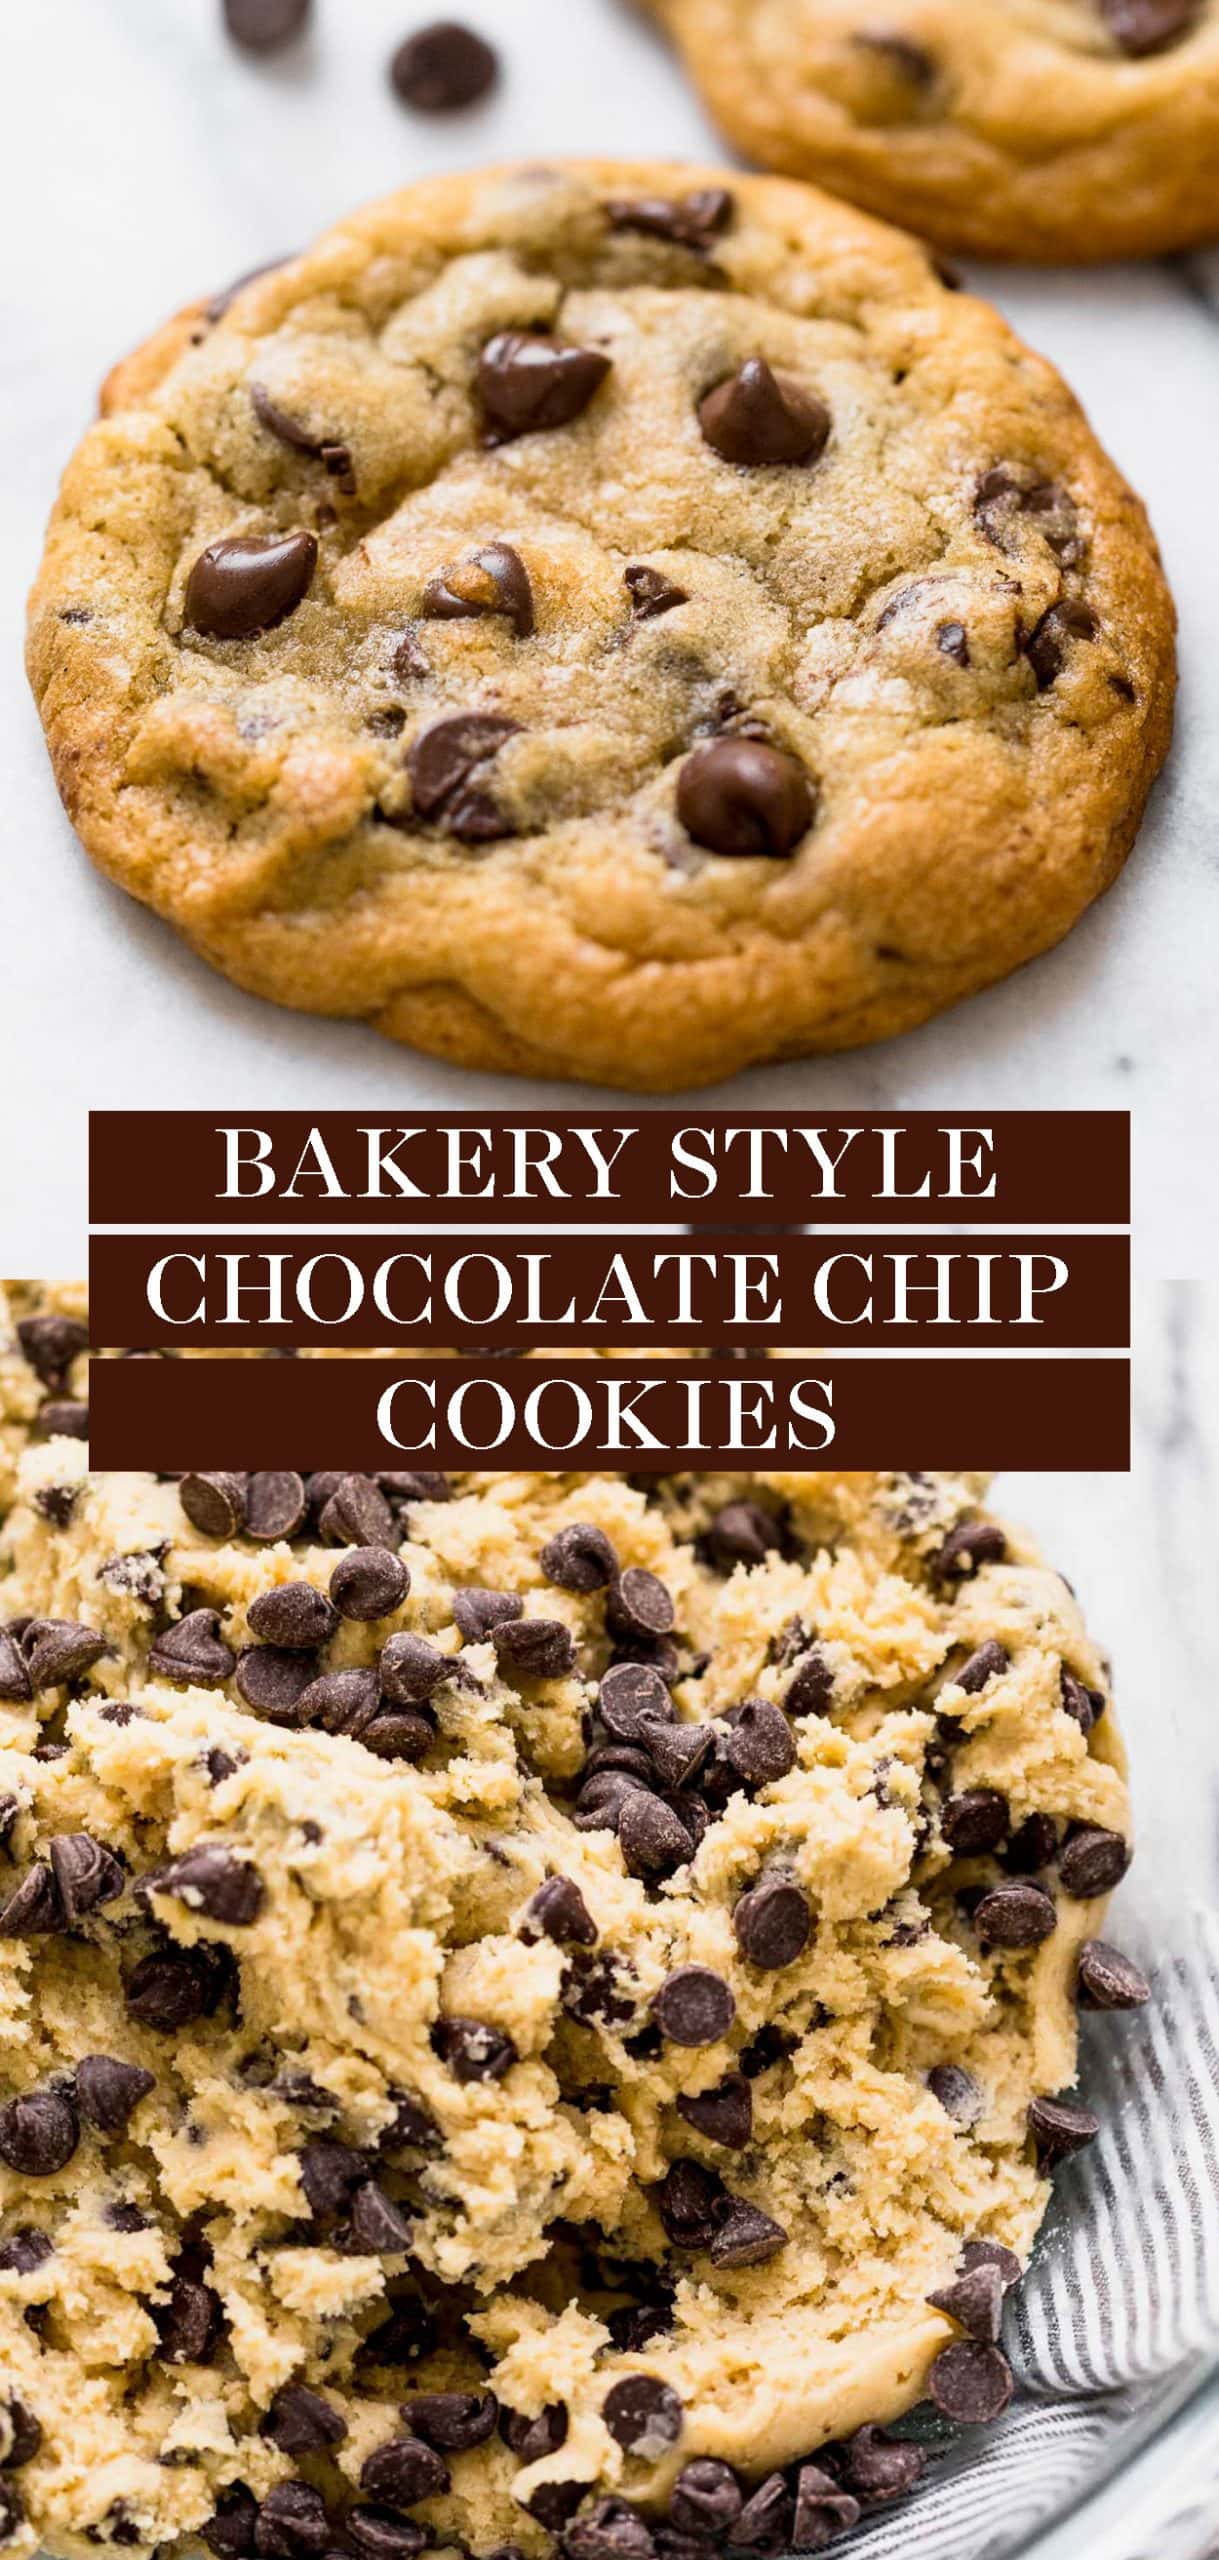 Best Bakery Style Chocolate Chip Cookies Recipe | Handle the Heat